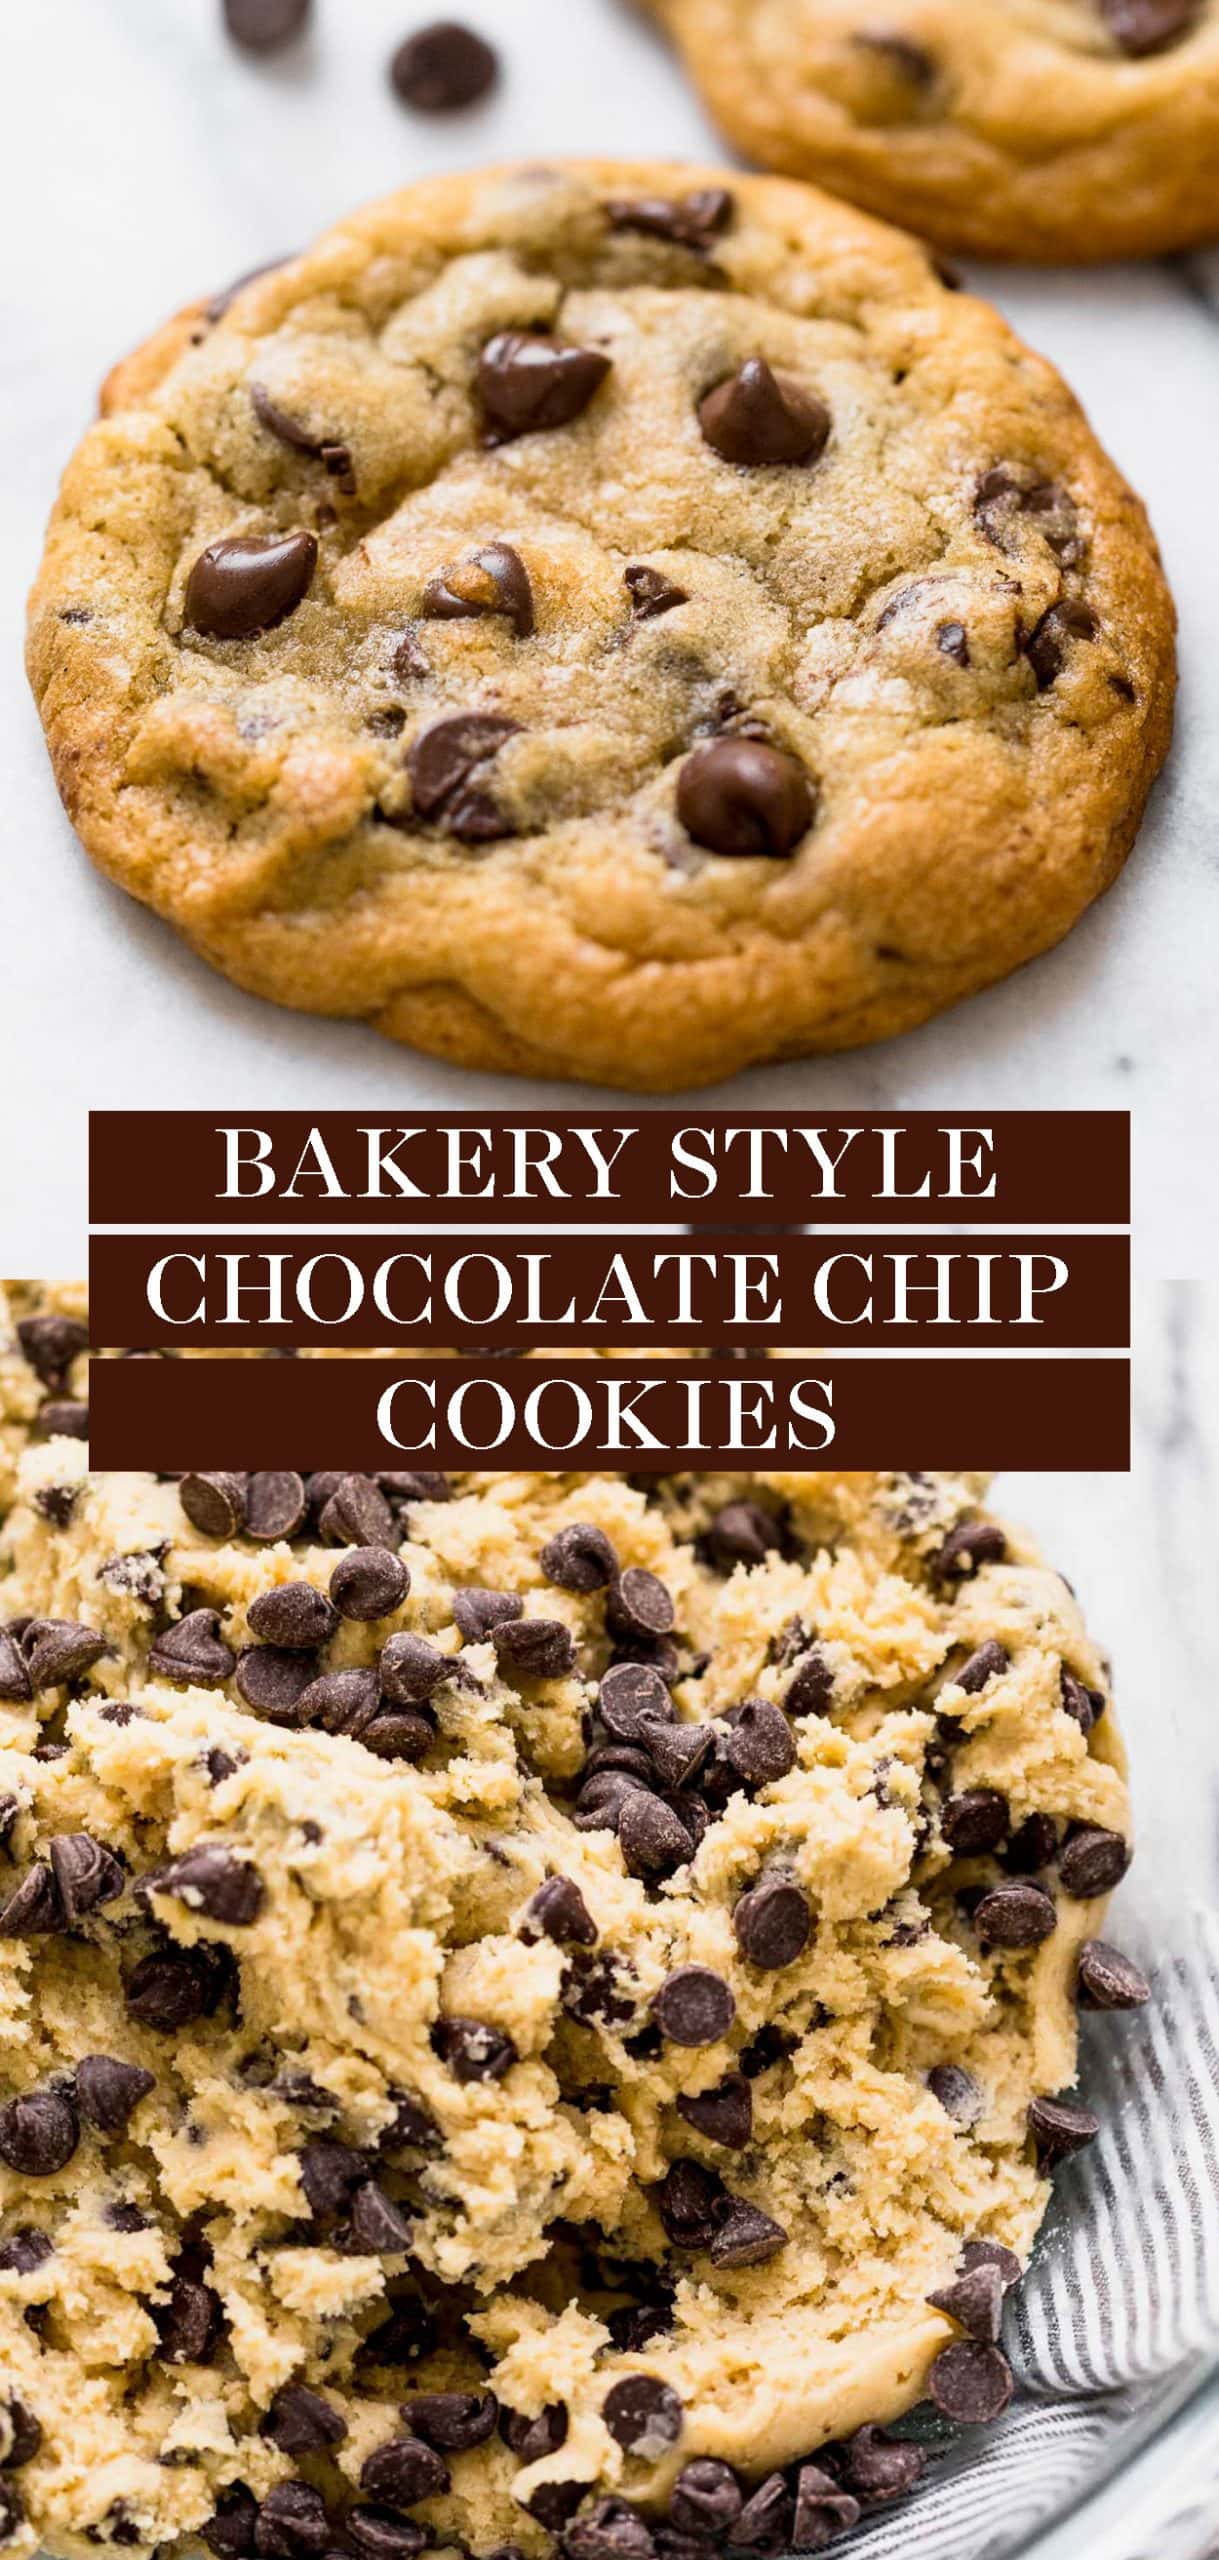 Best Bakery Style Chocolate Chip Cookies Recipe | Handle the Heat